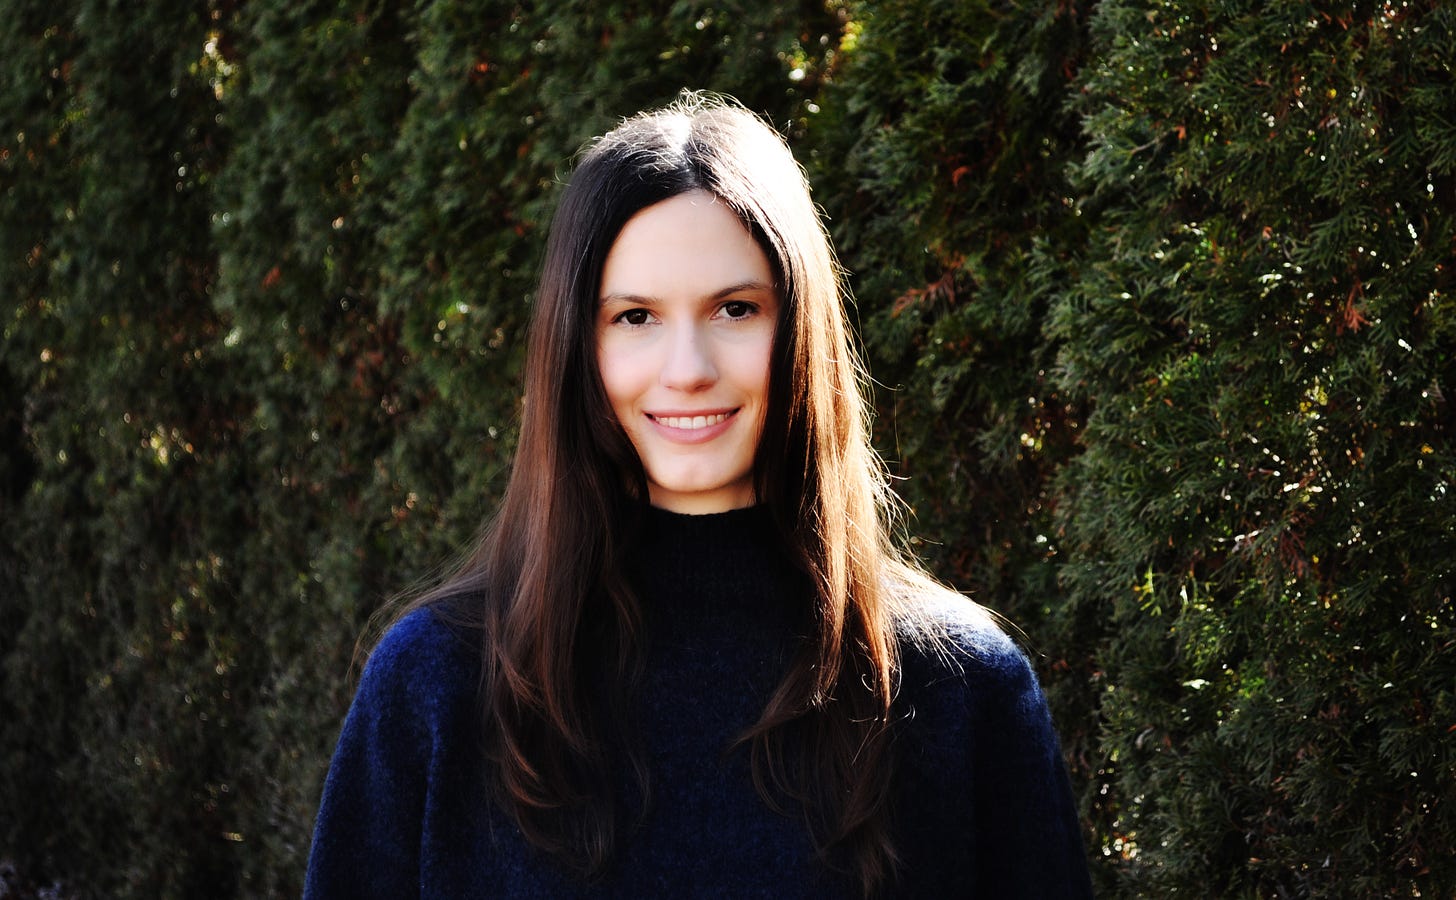 Headshot description: Olivia Muenz, a white woman with long brown hair and brown eyes, is smiling and wearing a navy sweater. She is in sunlight in front of rows of evergreen trees.